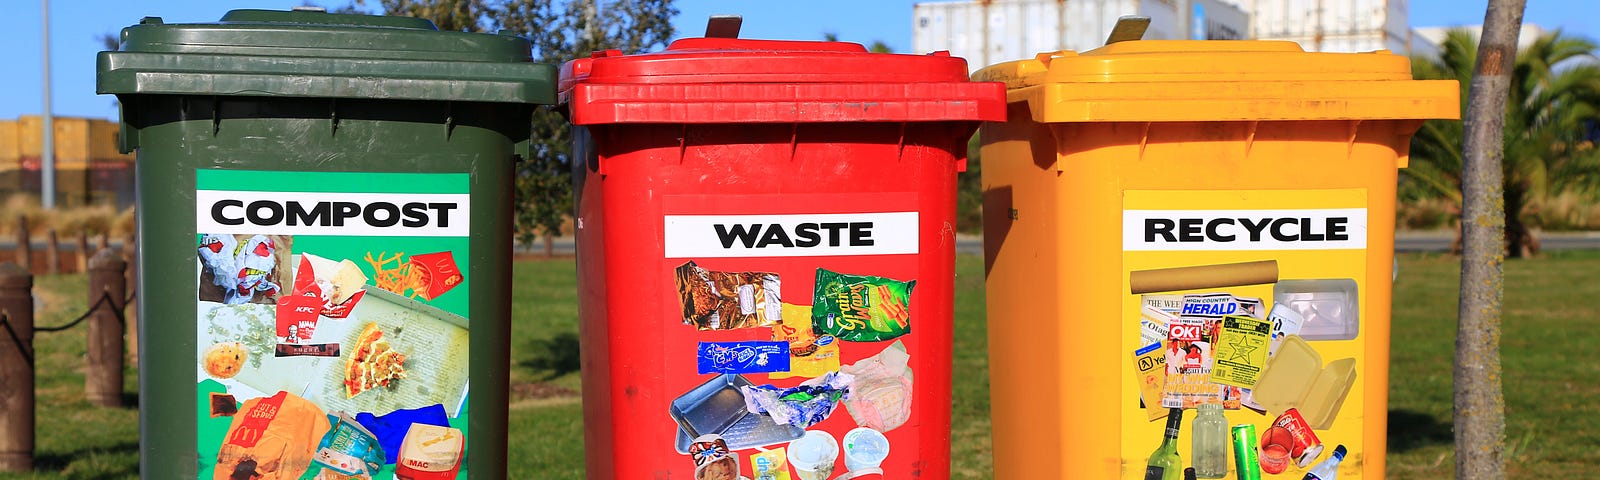 3 bins for recycling